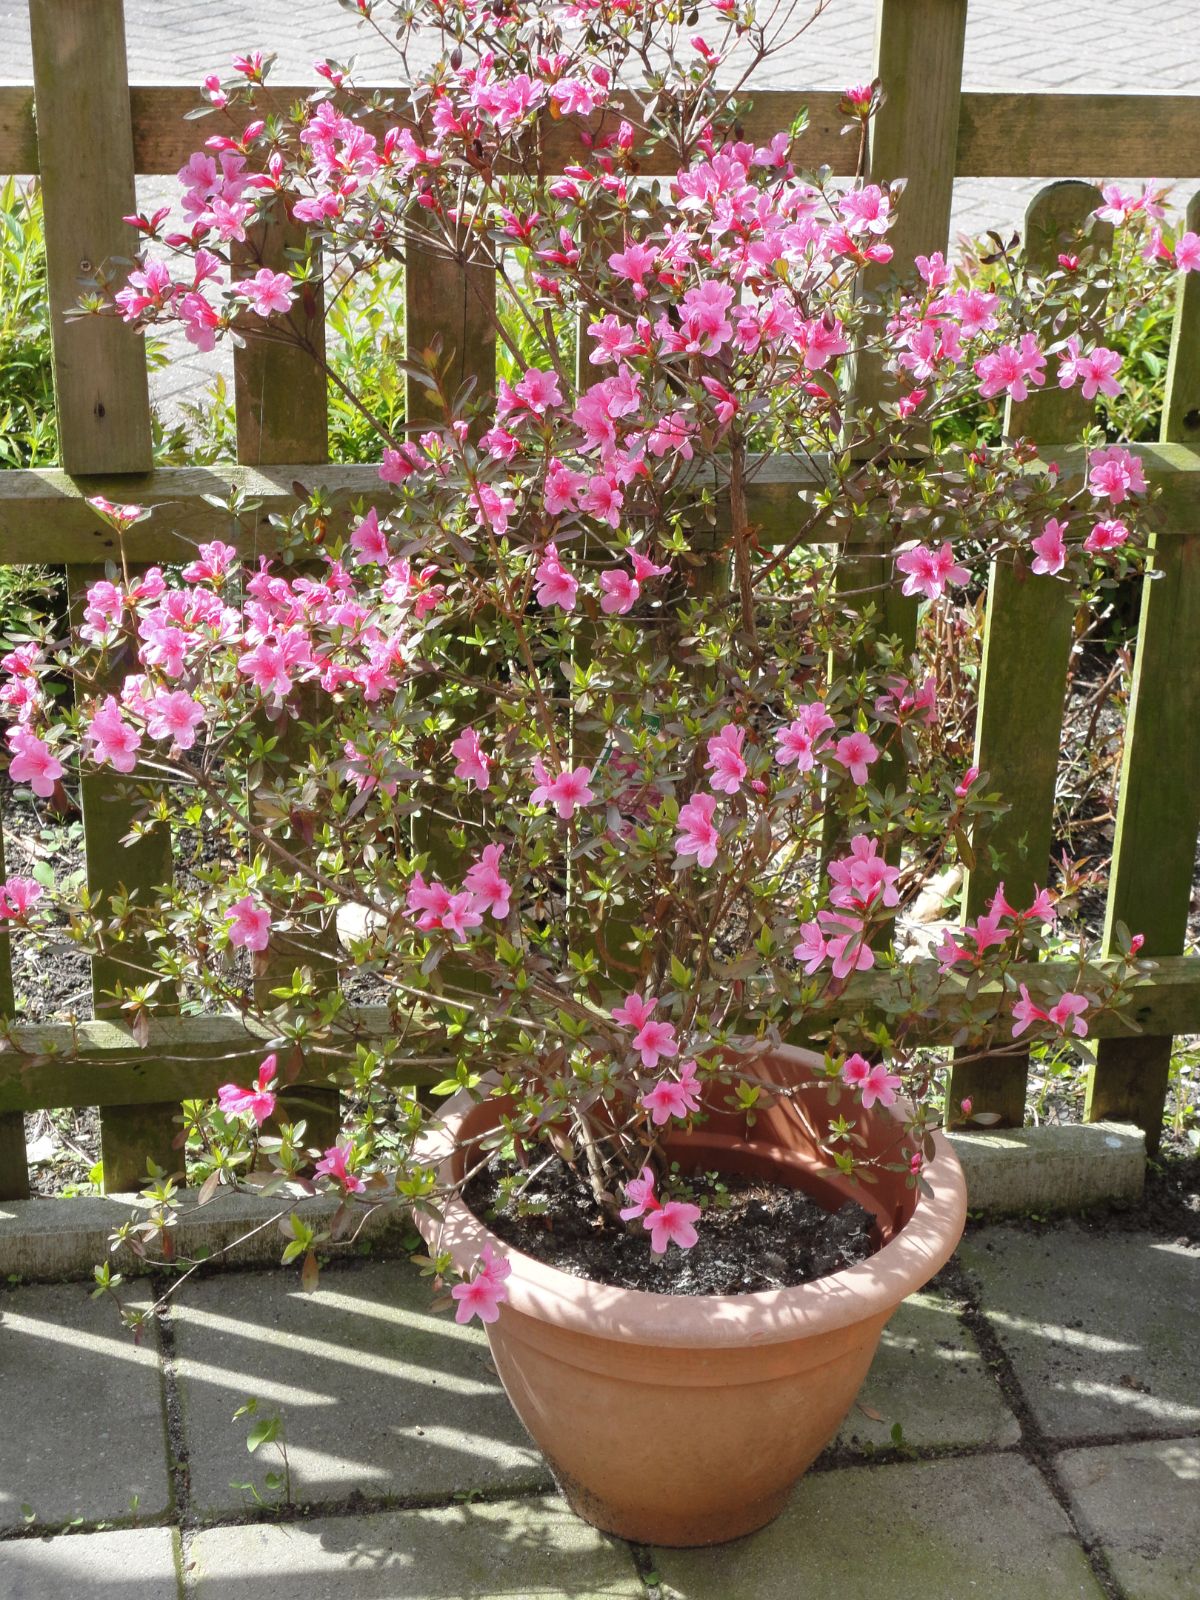 two images of pink flowering plants in pots.